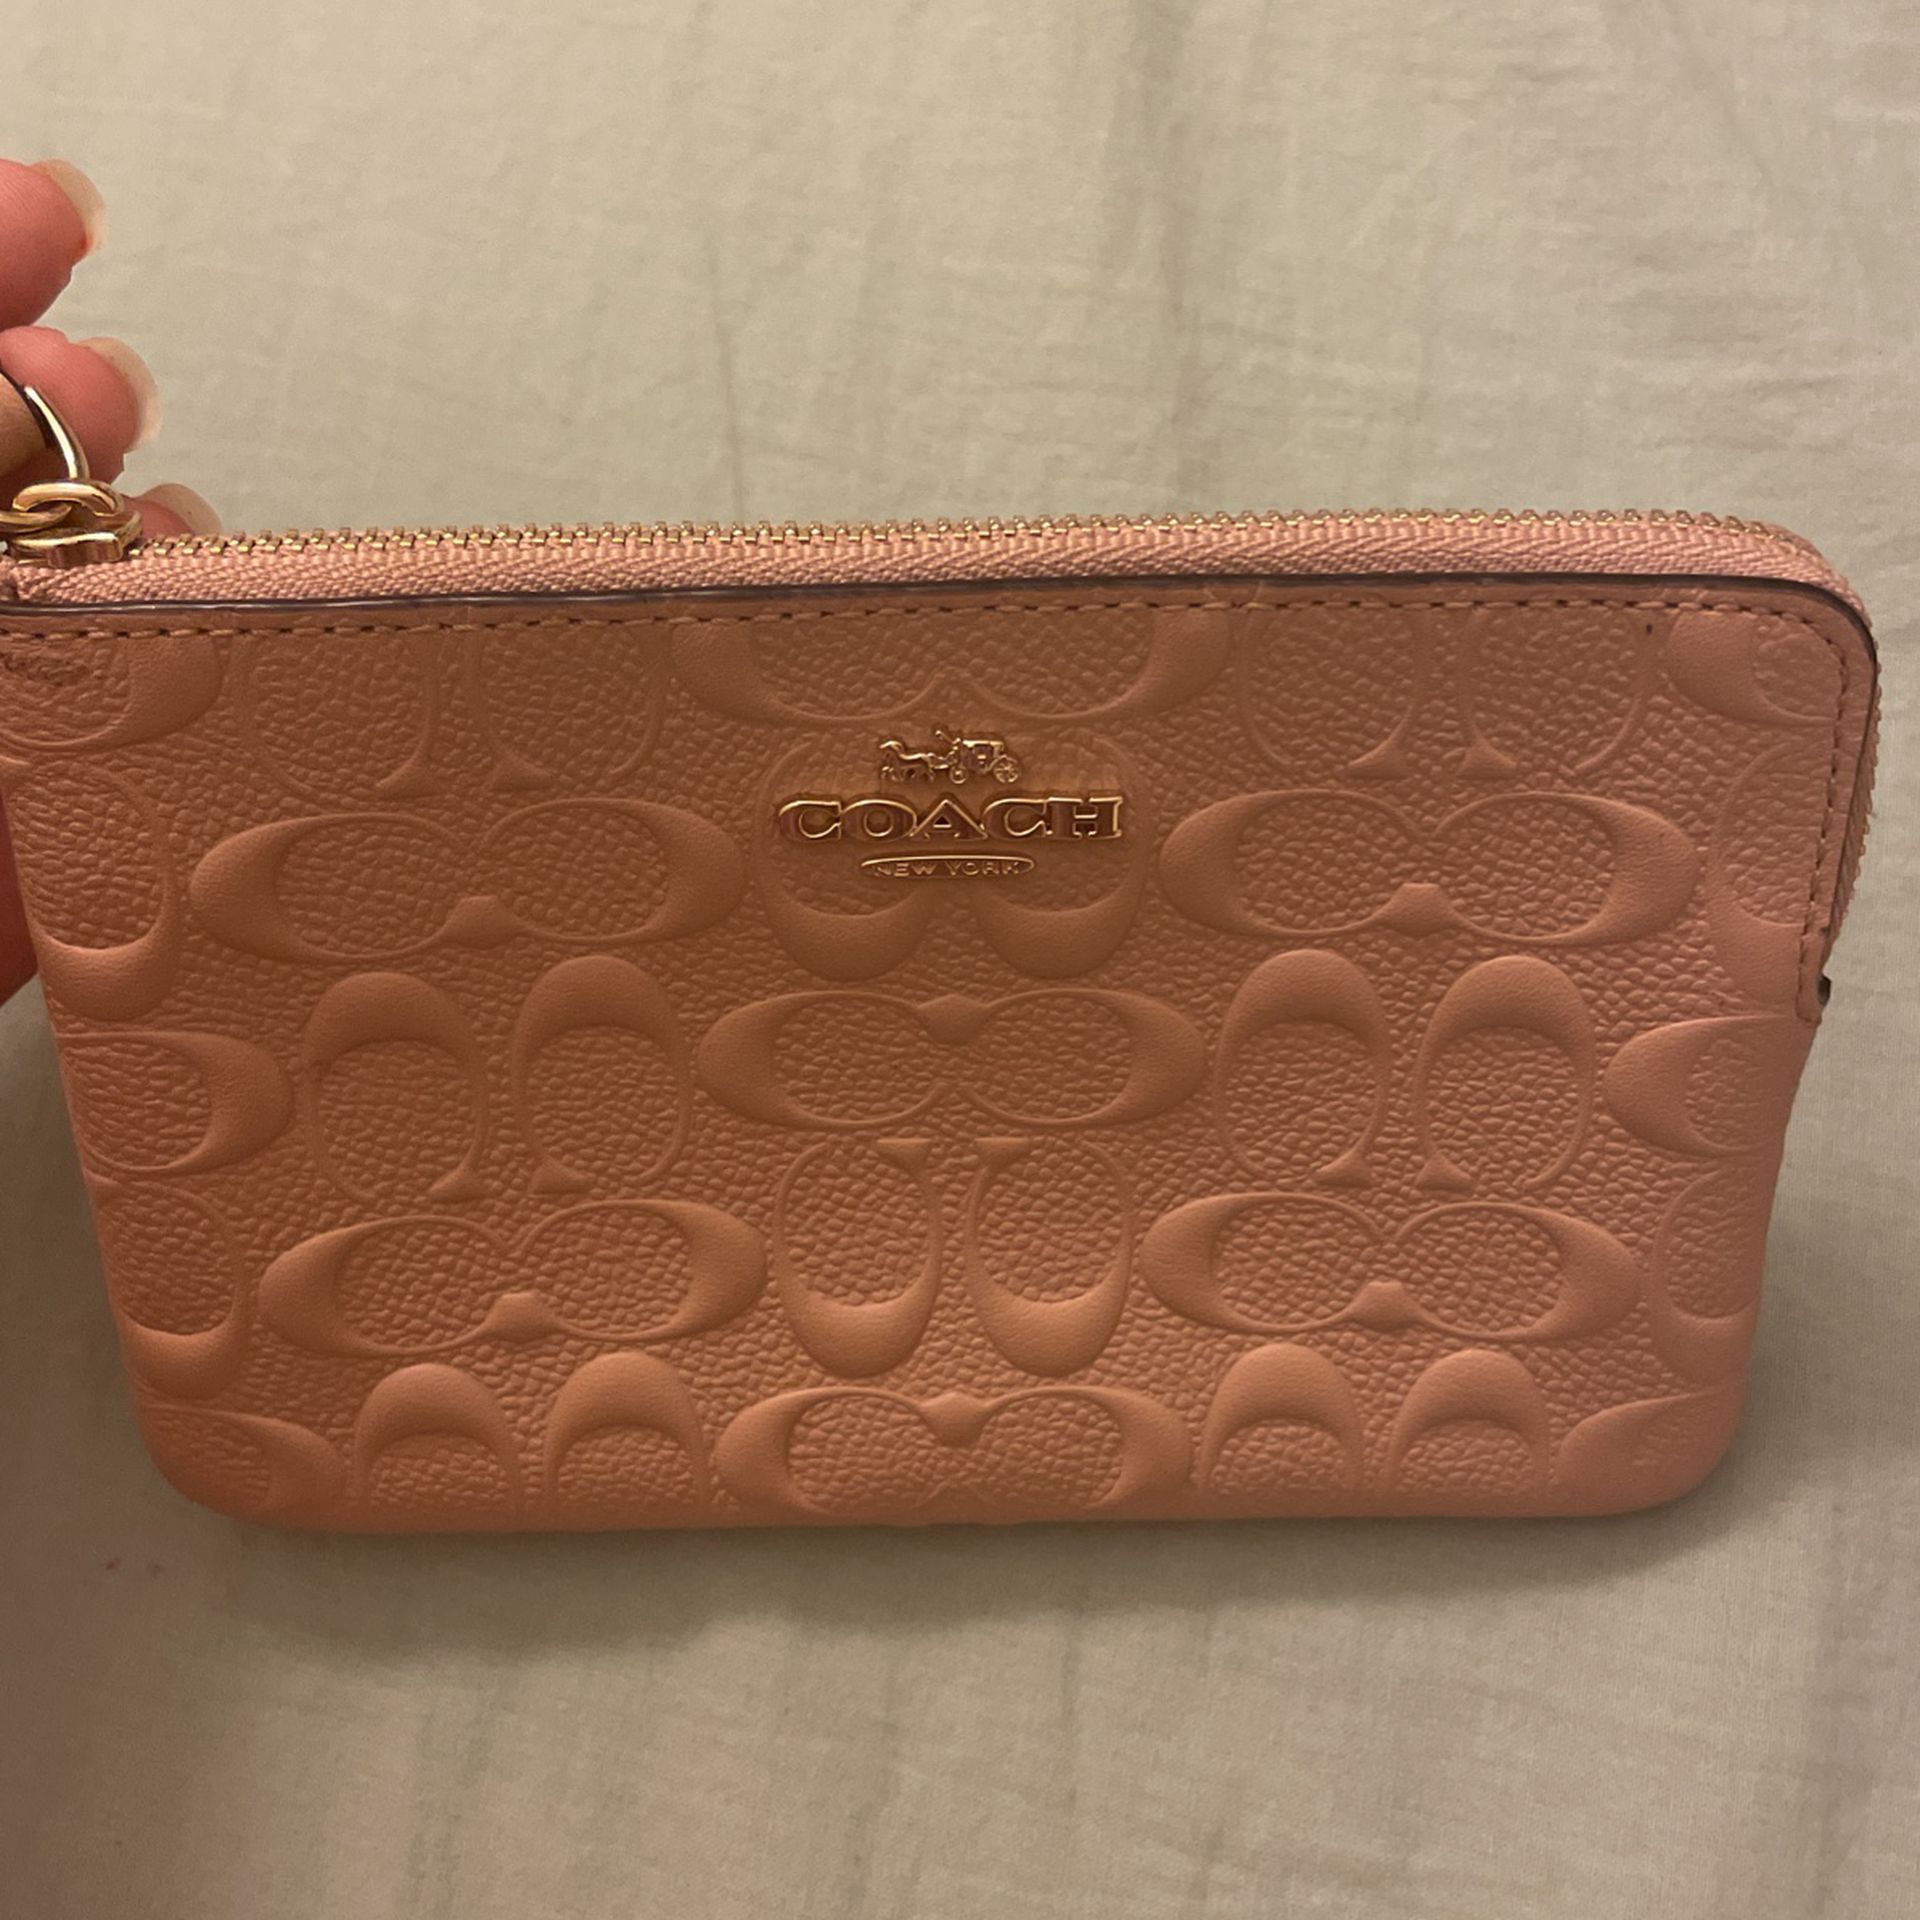 Small  Coach Wallet New Without Box